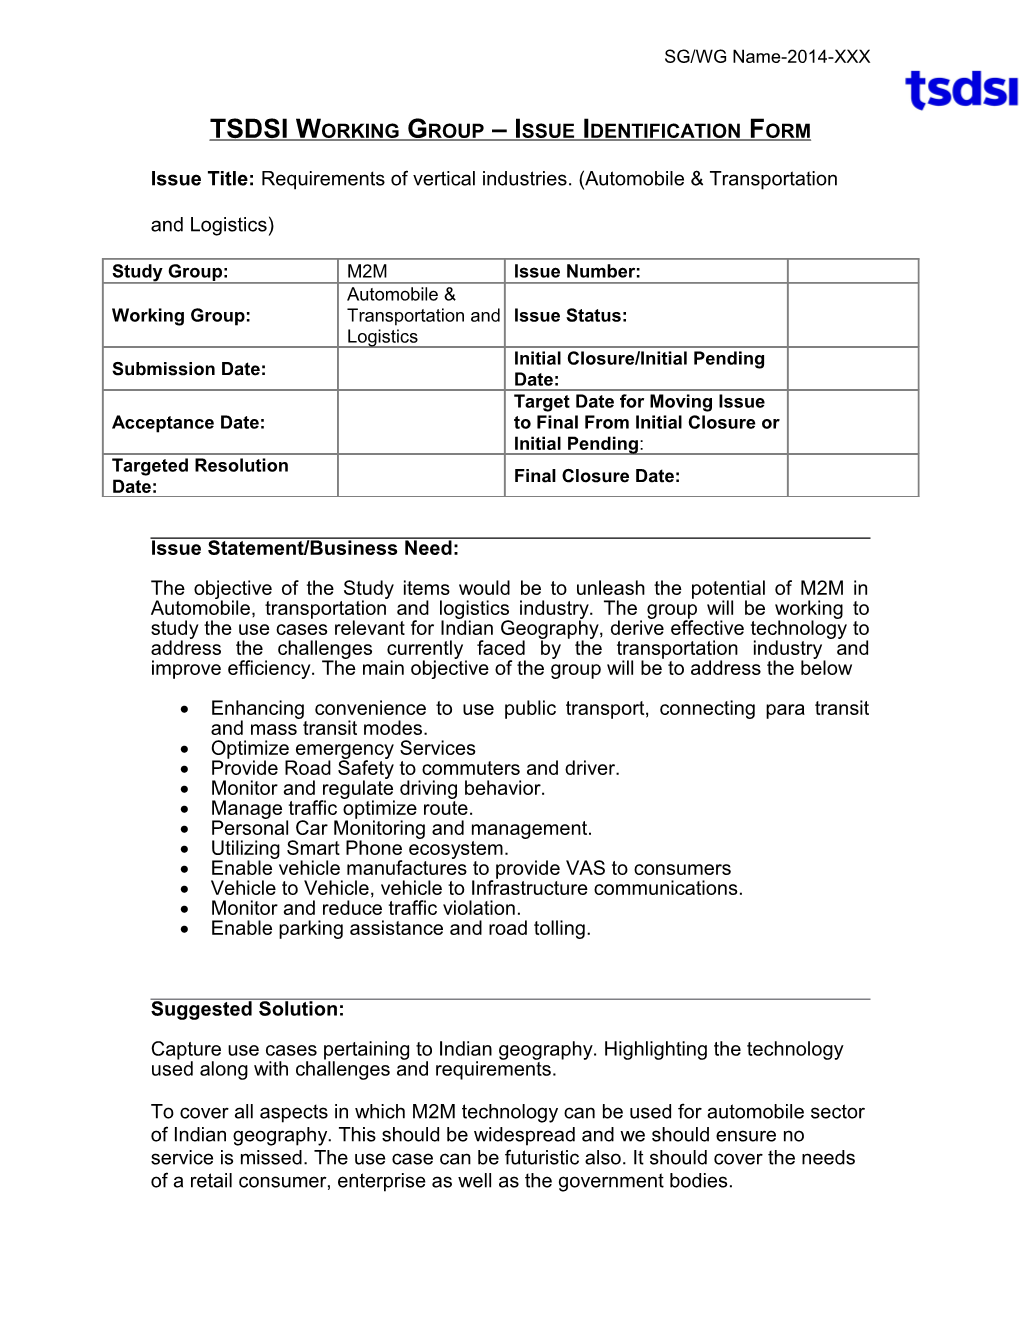 TSDSI Working Group Issue Identification Form